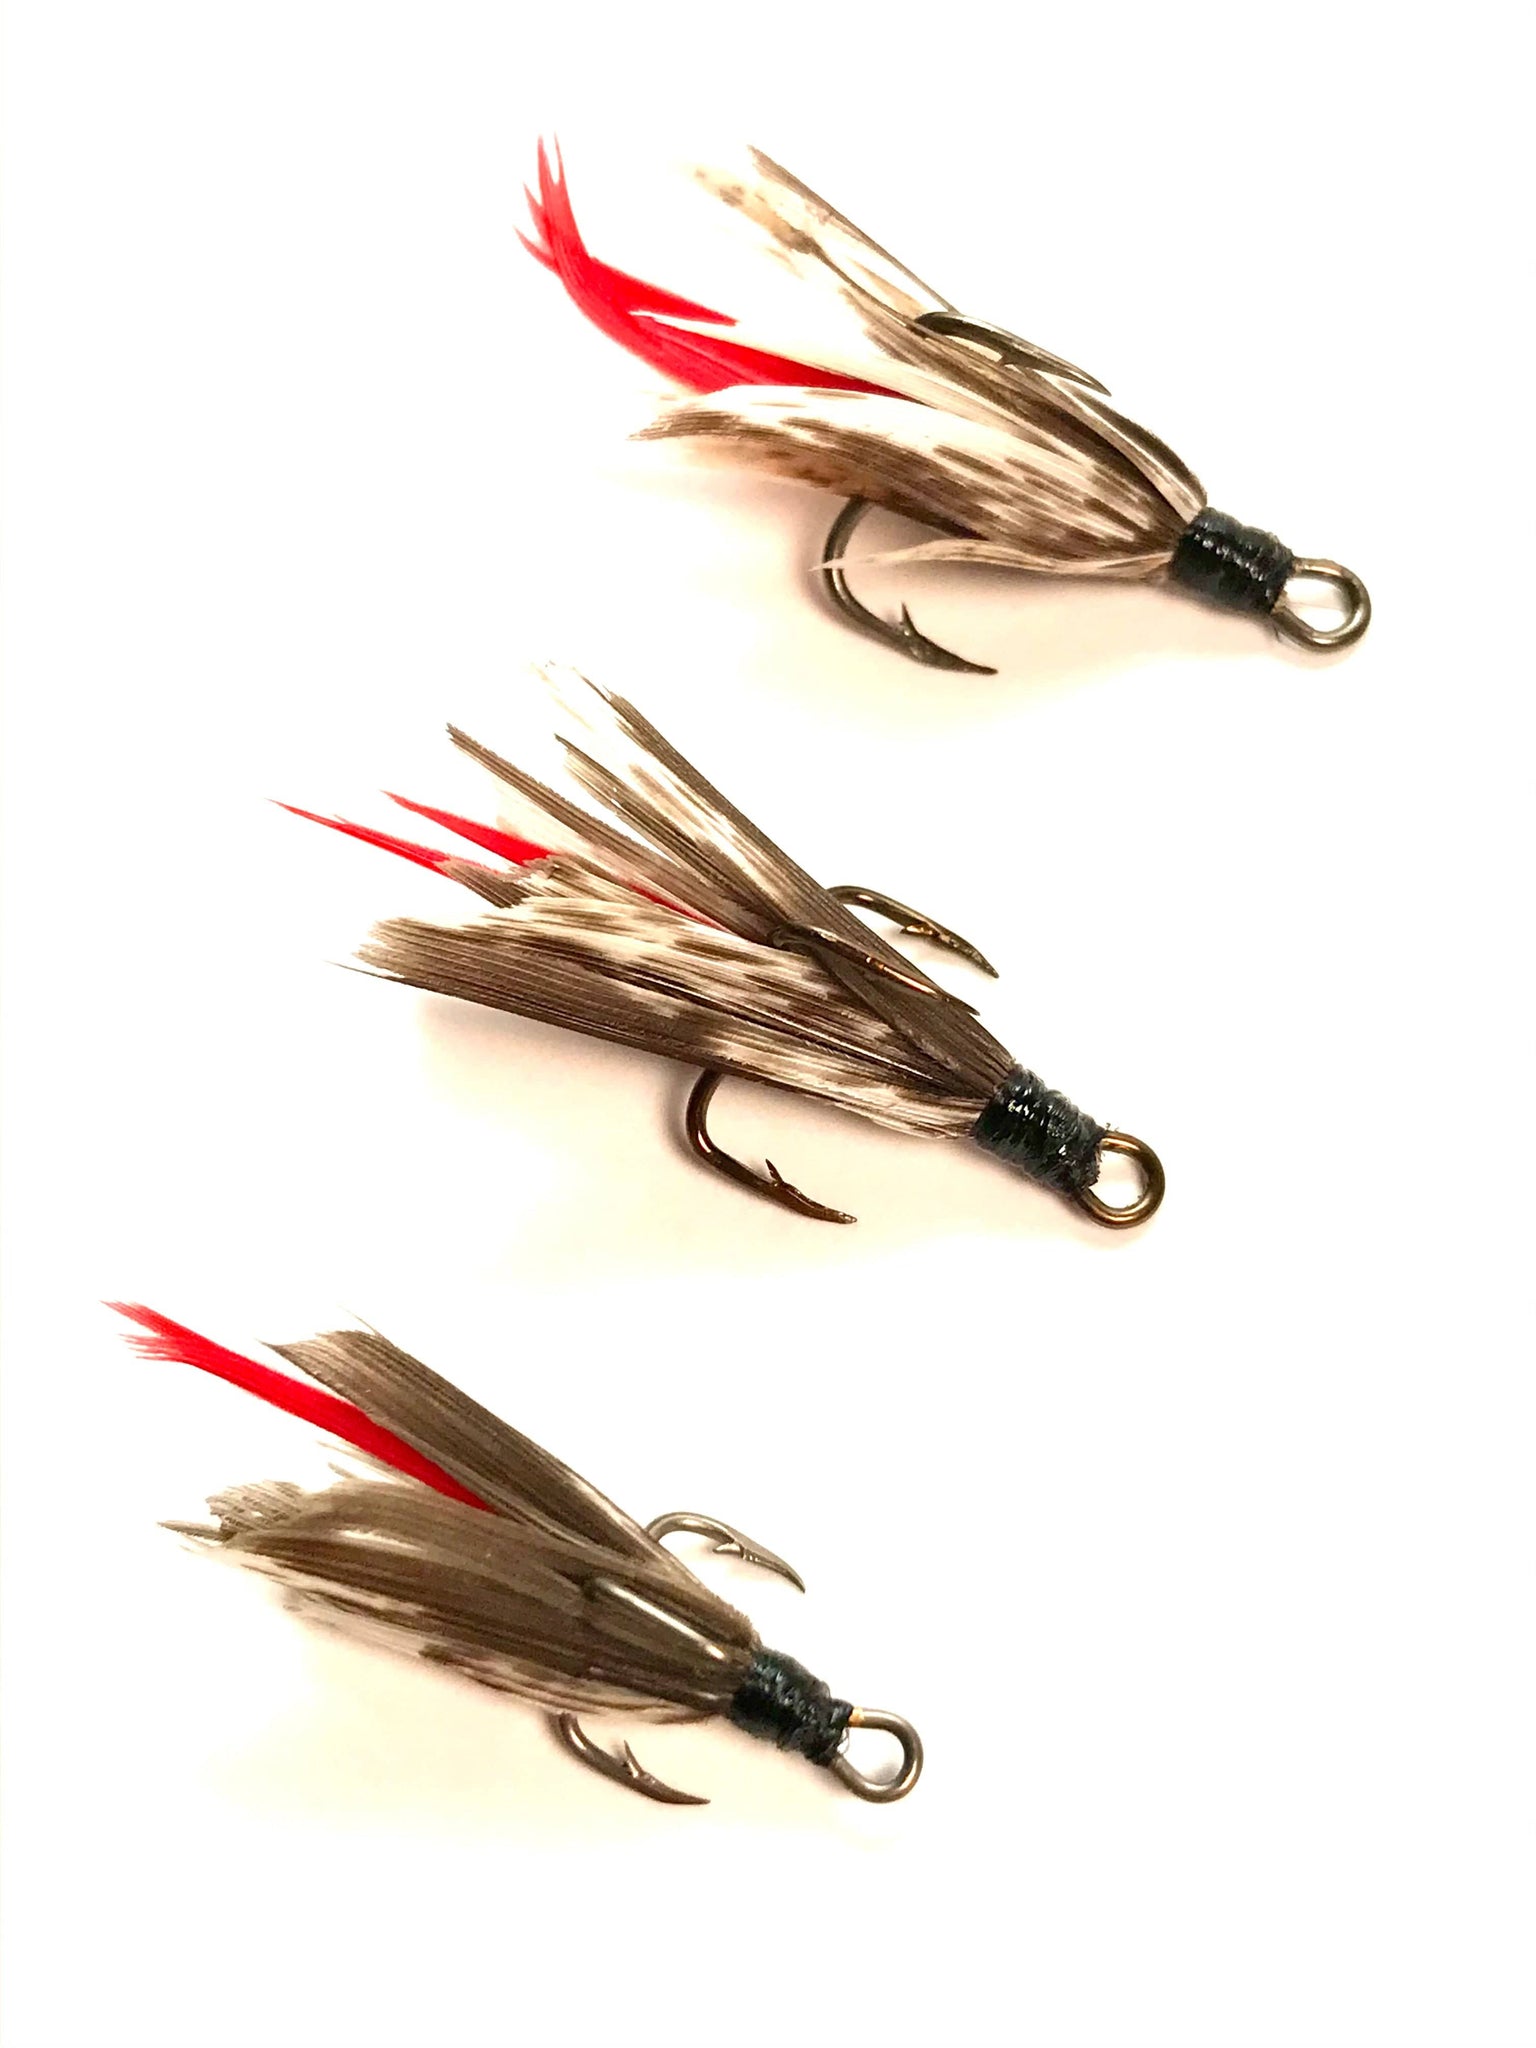 Hairy Hooks-The Best Dressed Treble Hooks to Catch More Fish – Dangle Lures